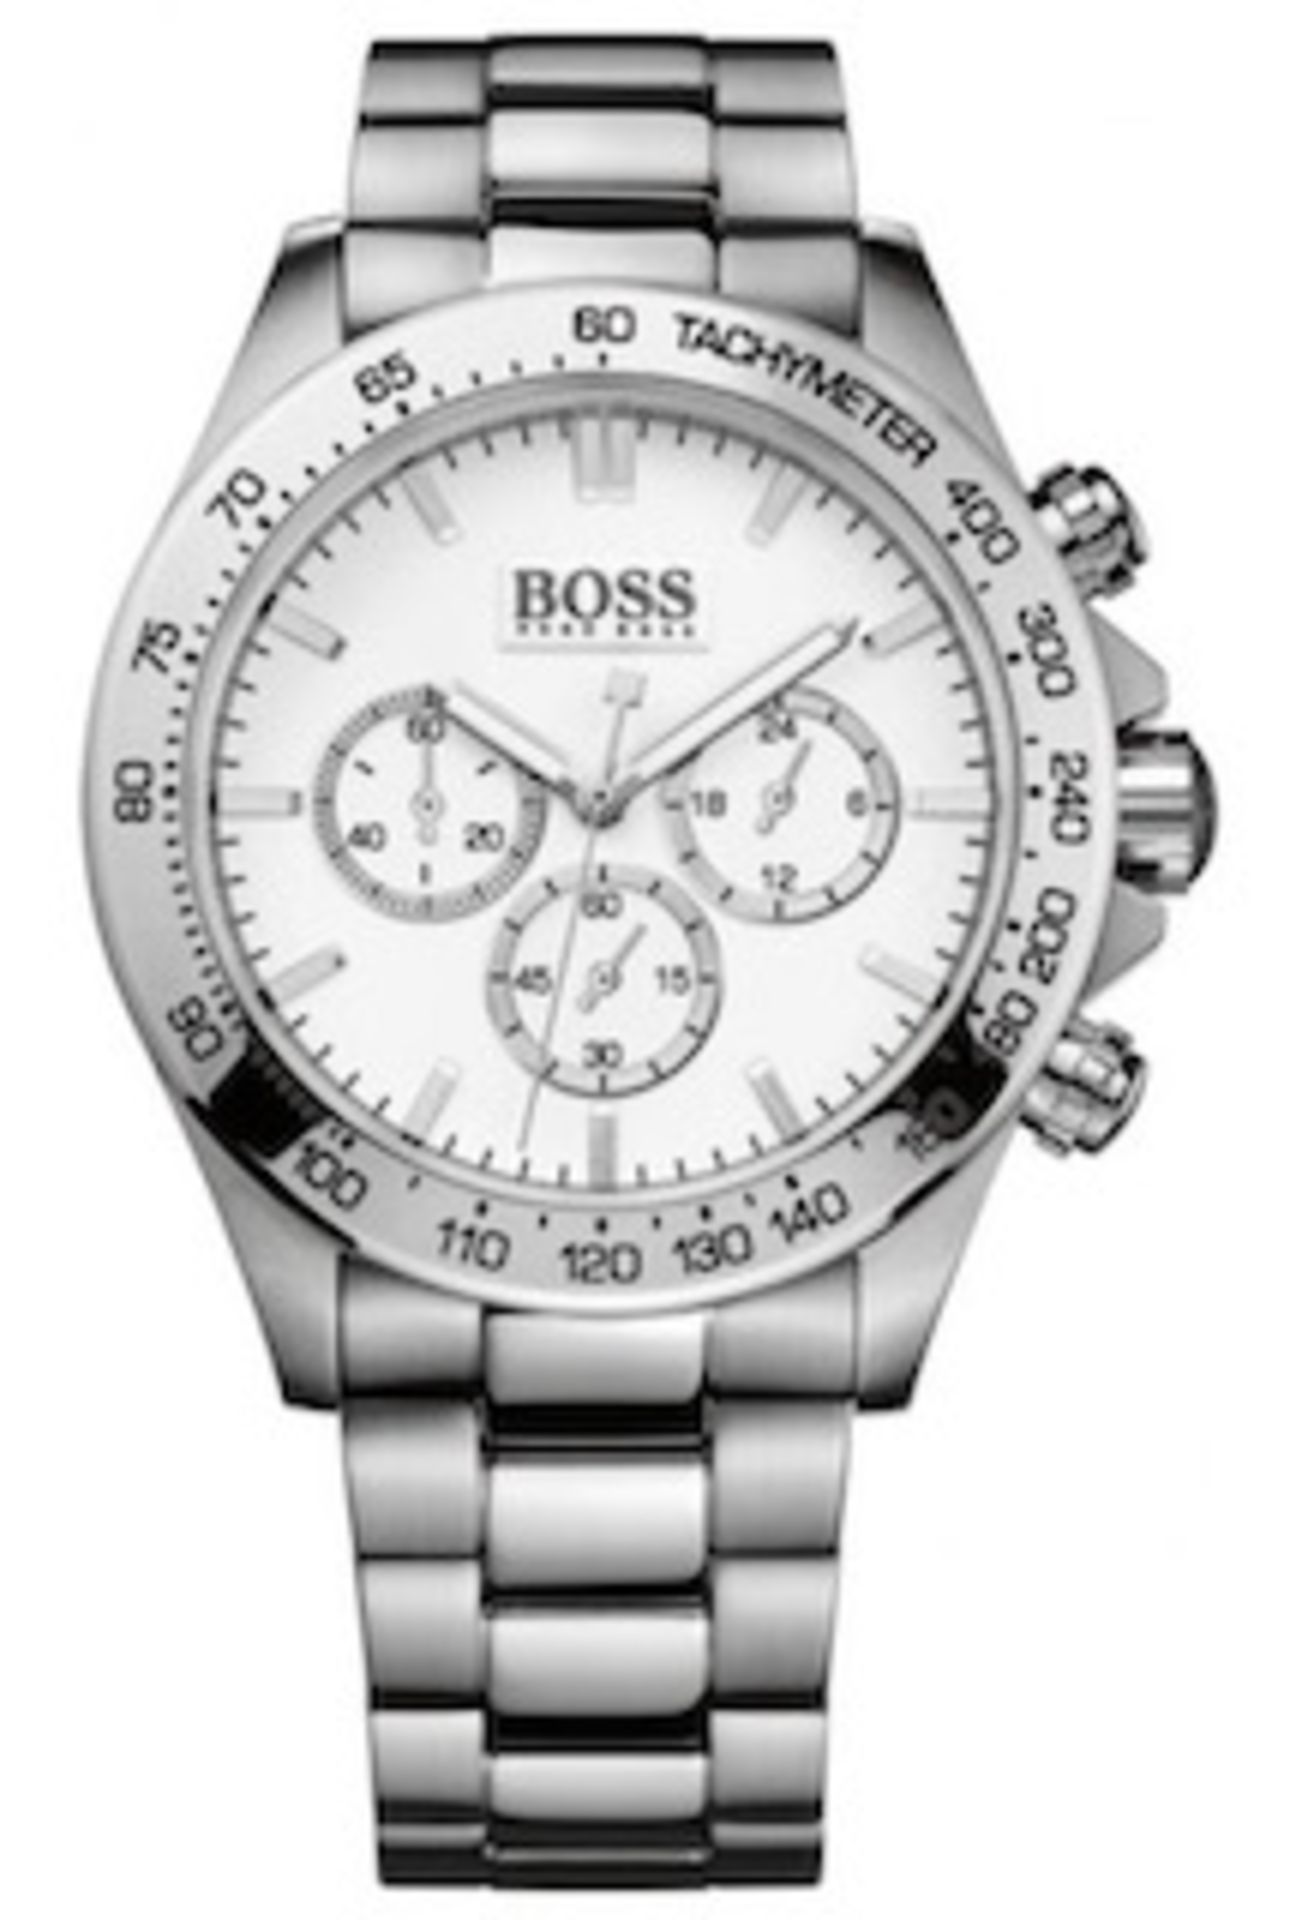 Hugo Boss Men's Ikon Silver Bracelet Chronograph Watch 1512962 Rugged And Purposeful Whilst